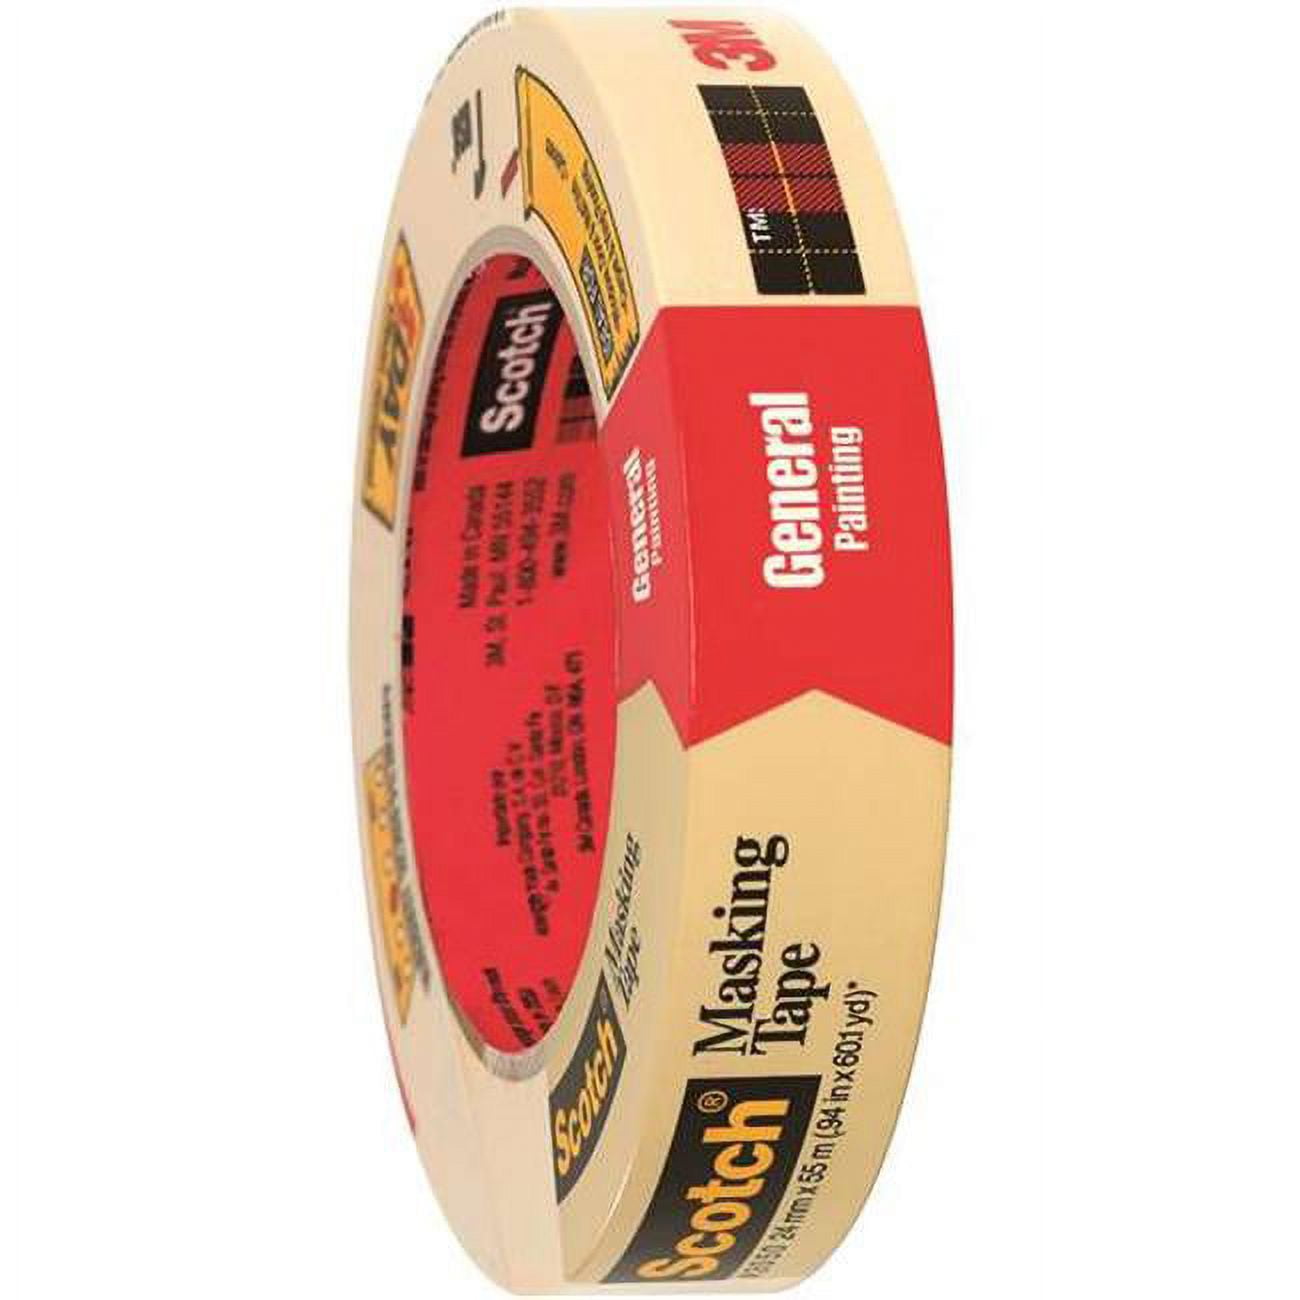 Scotch T9352050 1 In. X 60 Yards 2050 Masking Tape, Natural - Case Of 36